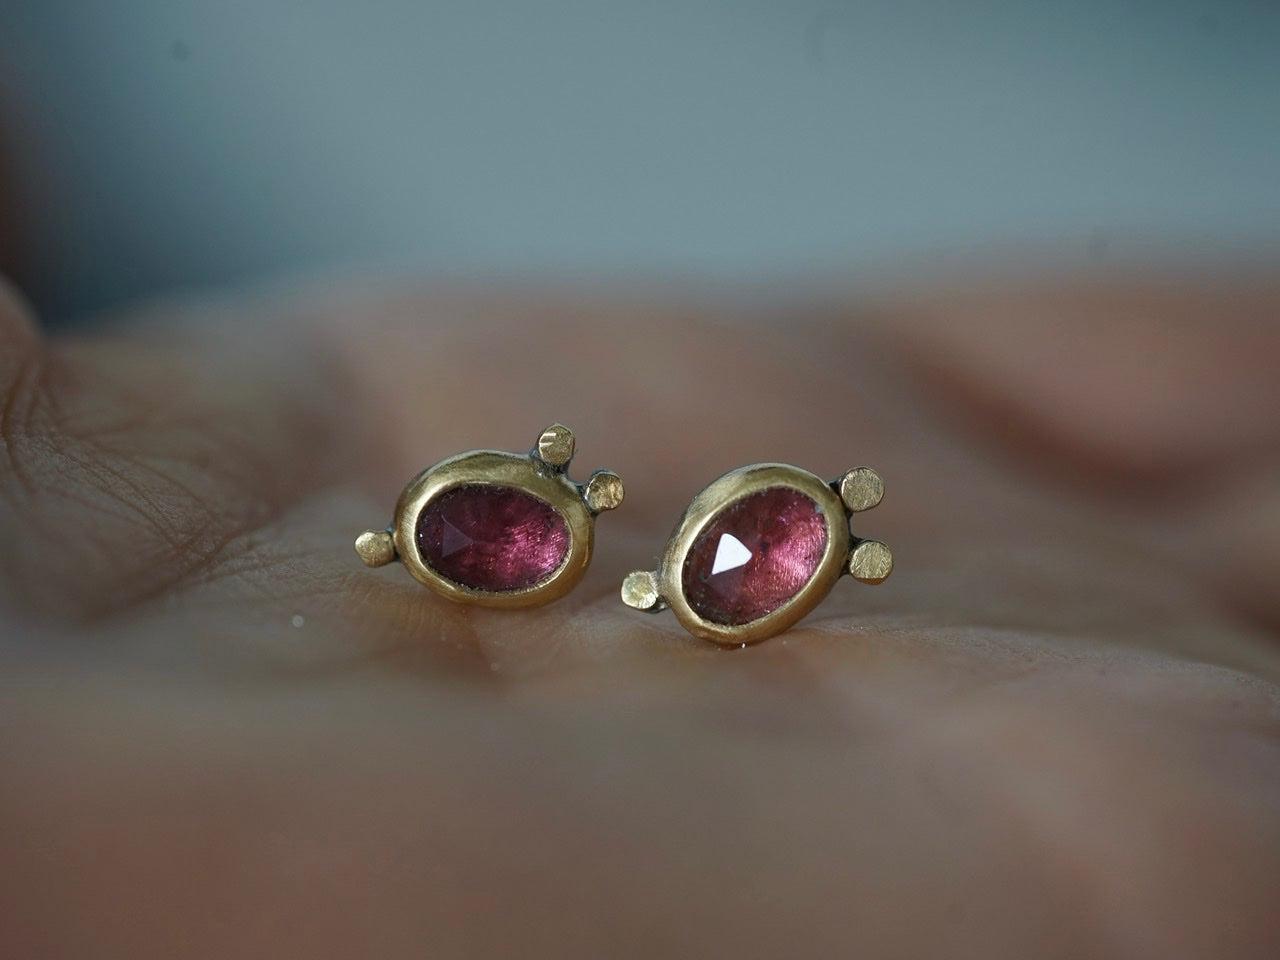 Rose cut pink tourmaline and 22k gold post earrings